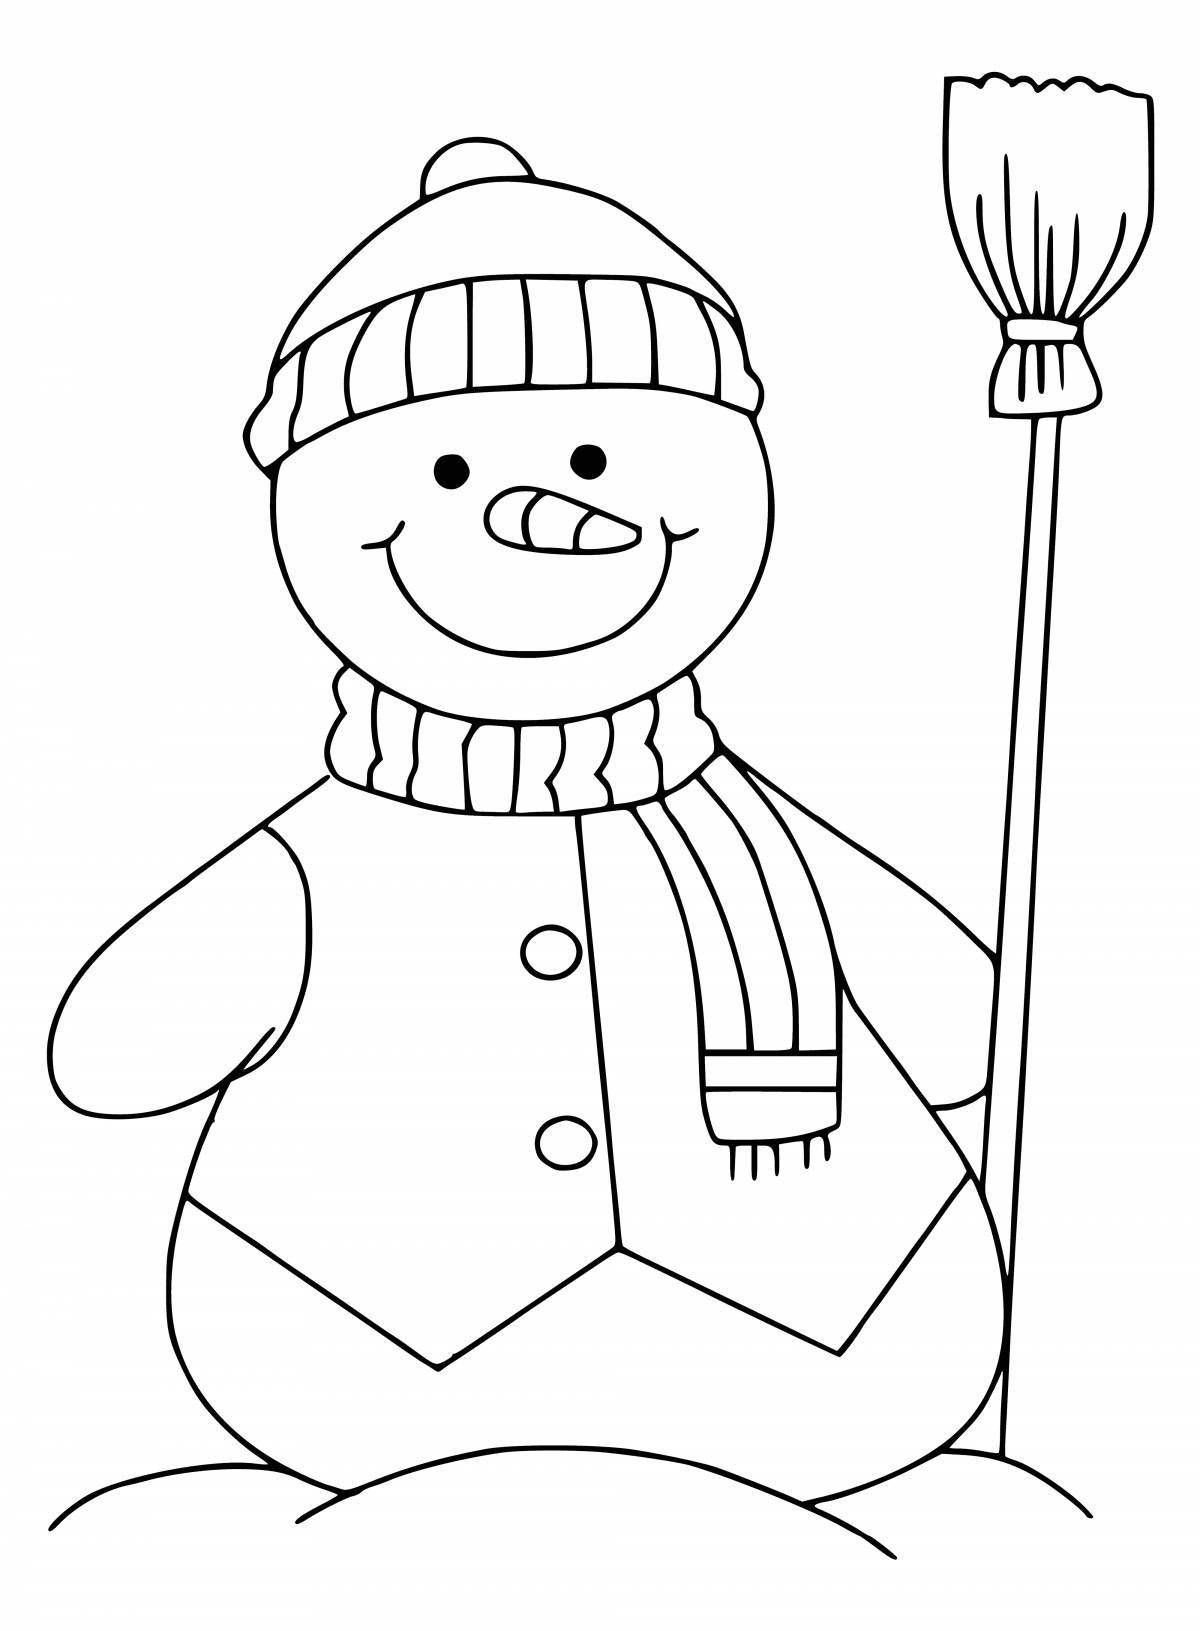 Coloring page dizzy snowman birthday